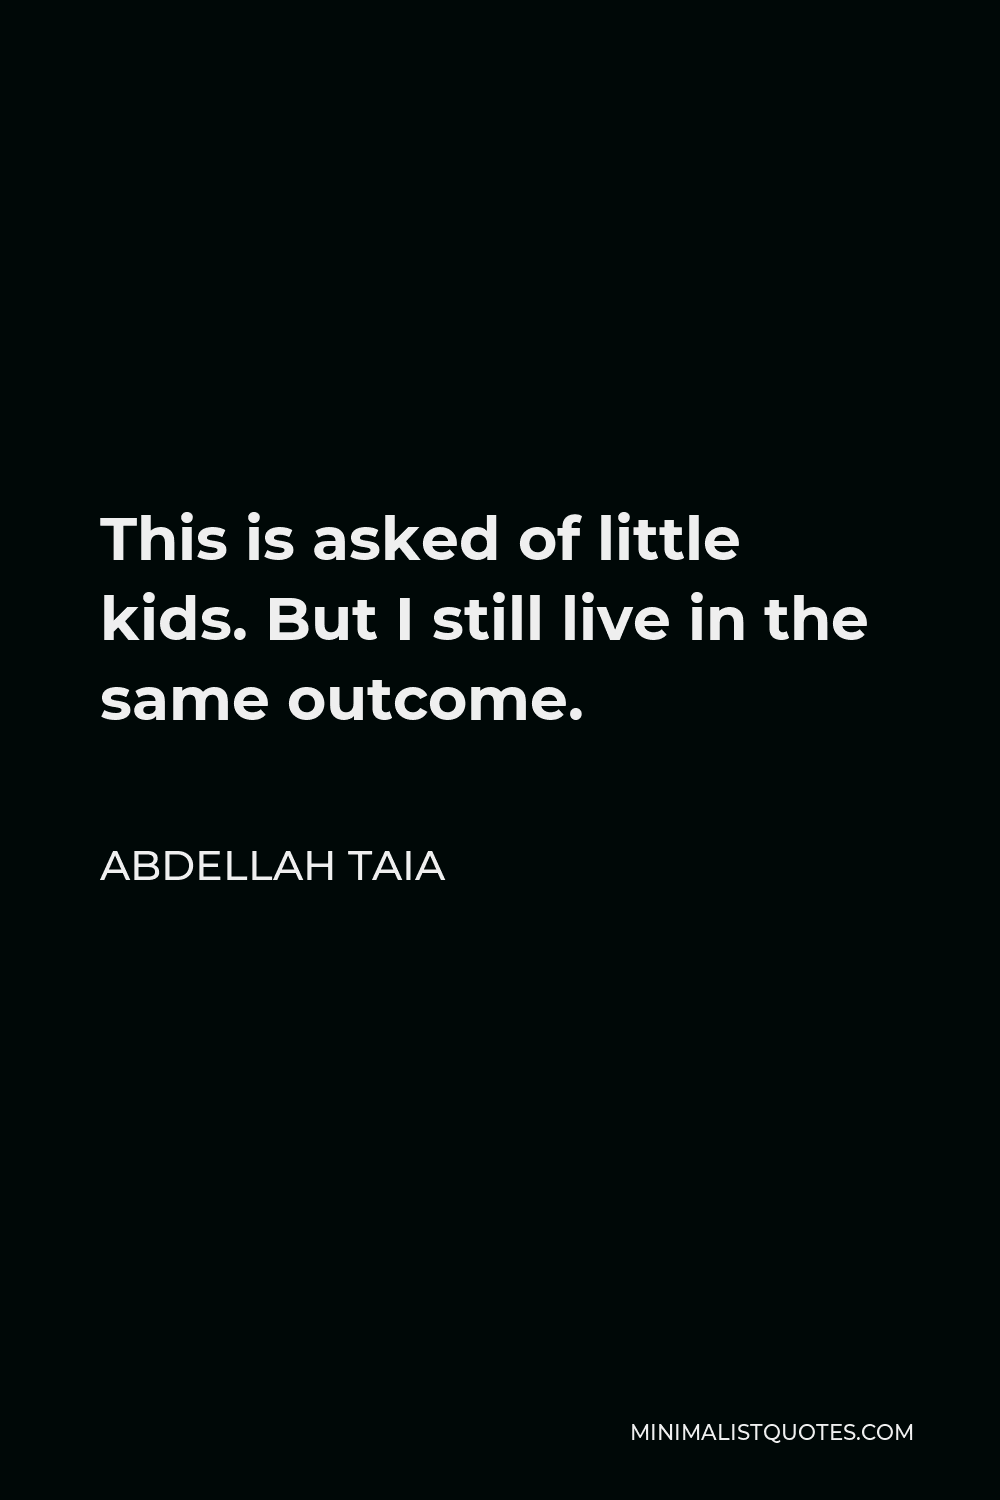 Abdellah Taia Quote - This is asked of little kids. But I still live in the same outcome.